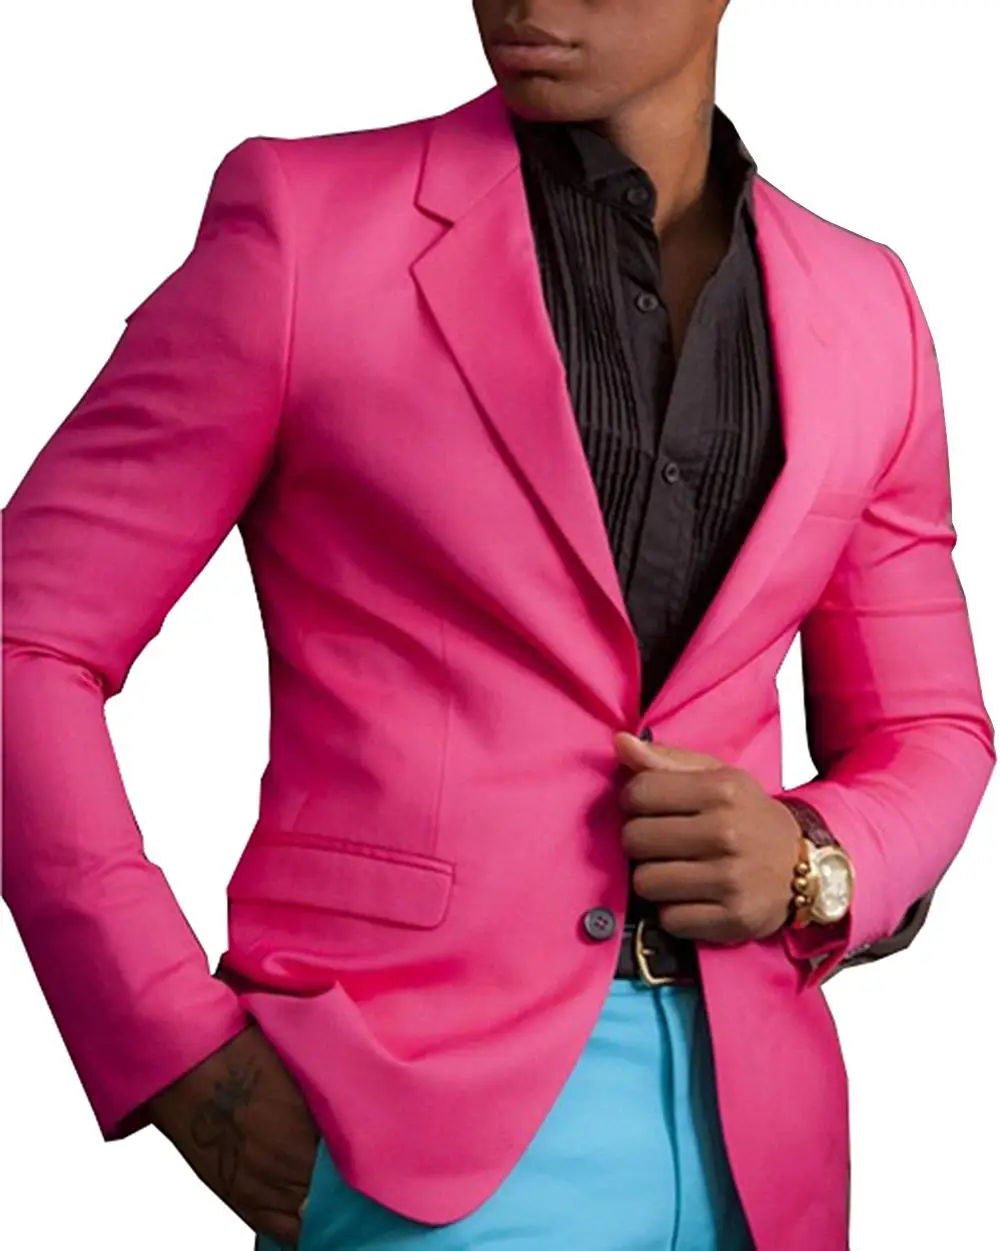 Cheap Hot Pink Mens Suit, find Hot Pink Mens Suit deals on line at ...